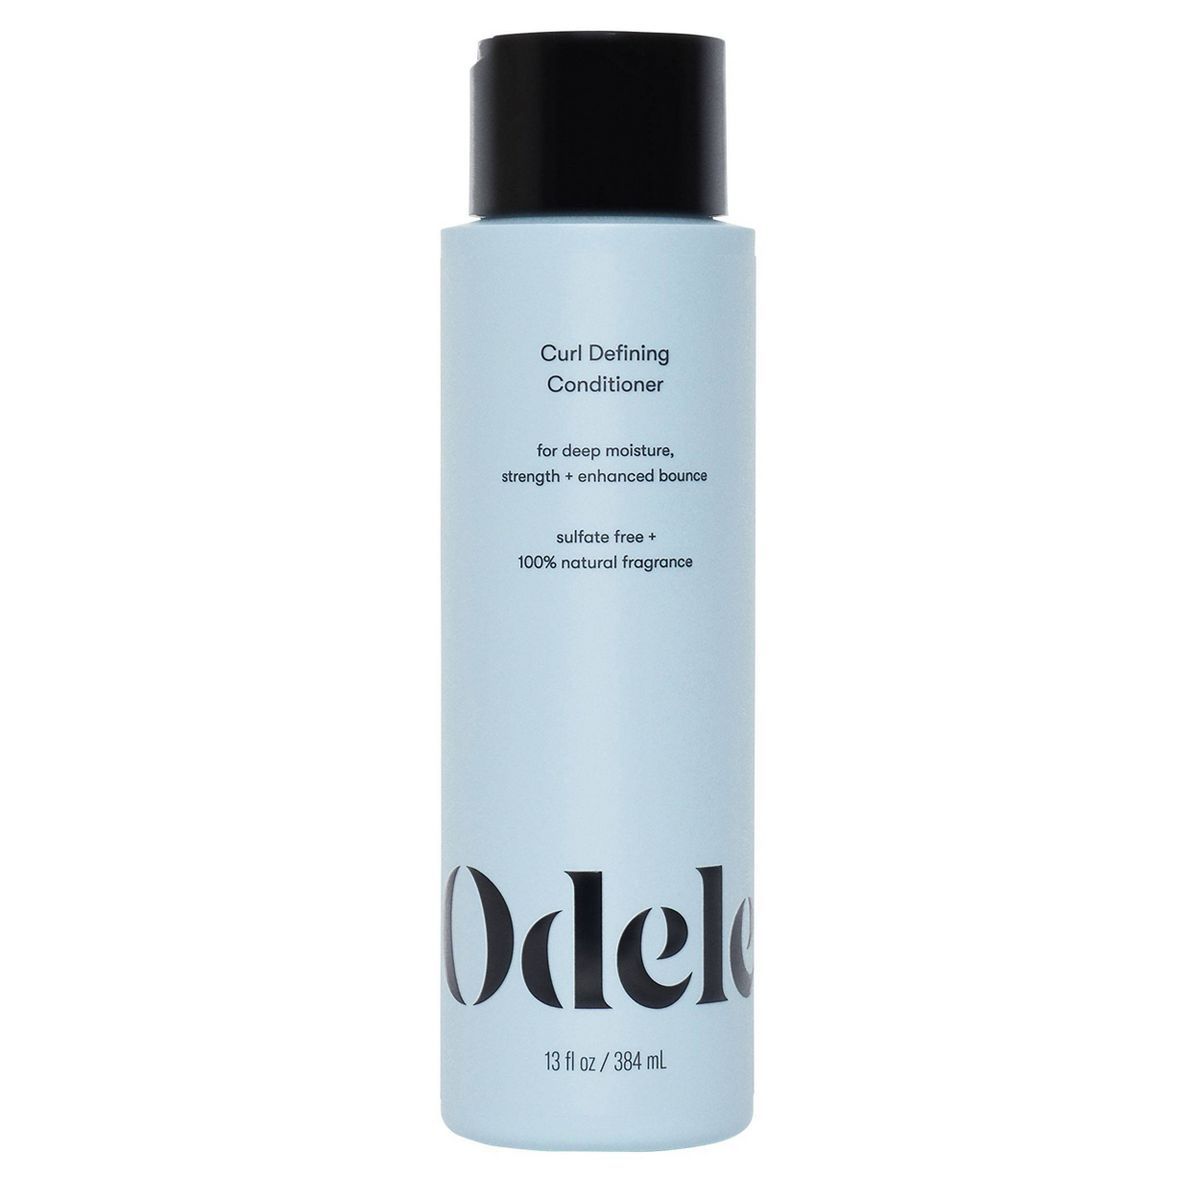 Odele Curl Defining Conditioner Clean, Deep Hydration for Curly to Coily Hair - 13 fl oz | Target